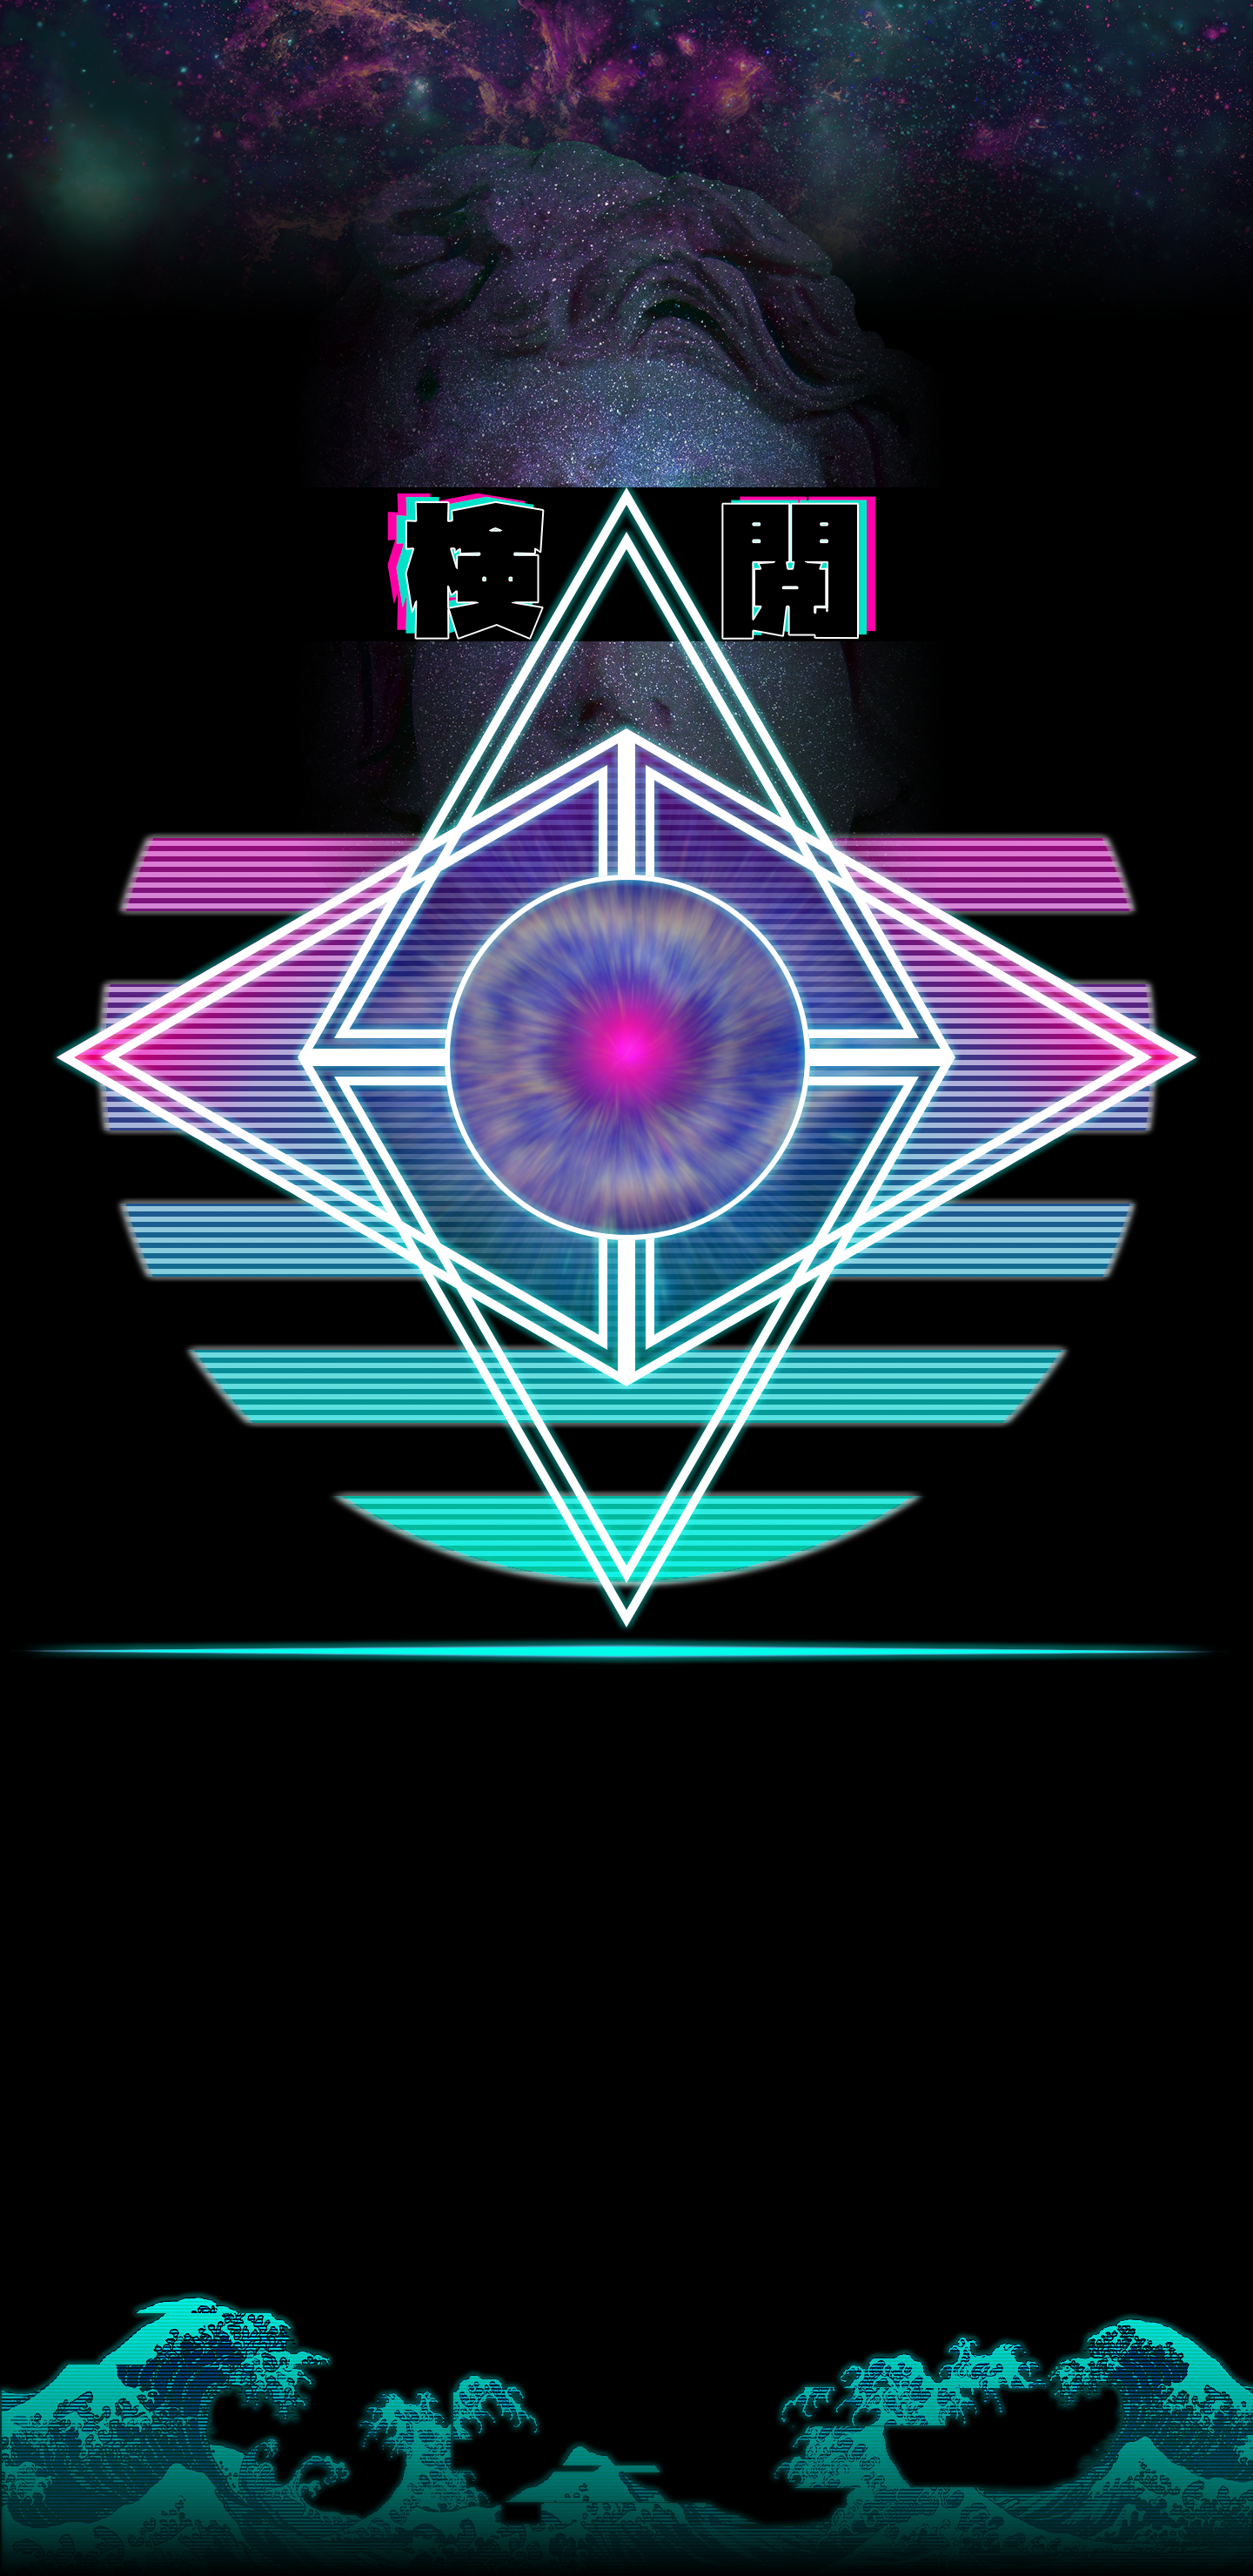 AMOLED Star Wallpaper Inspired by Outrun and Vaporwave